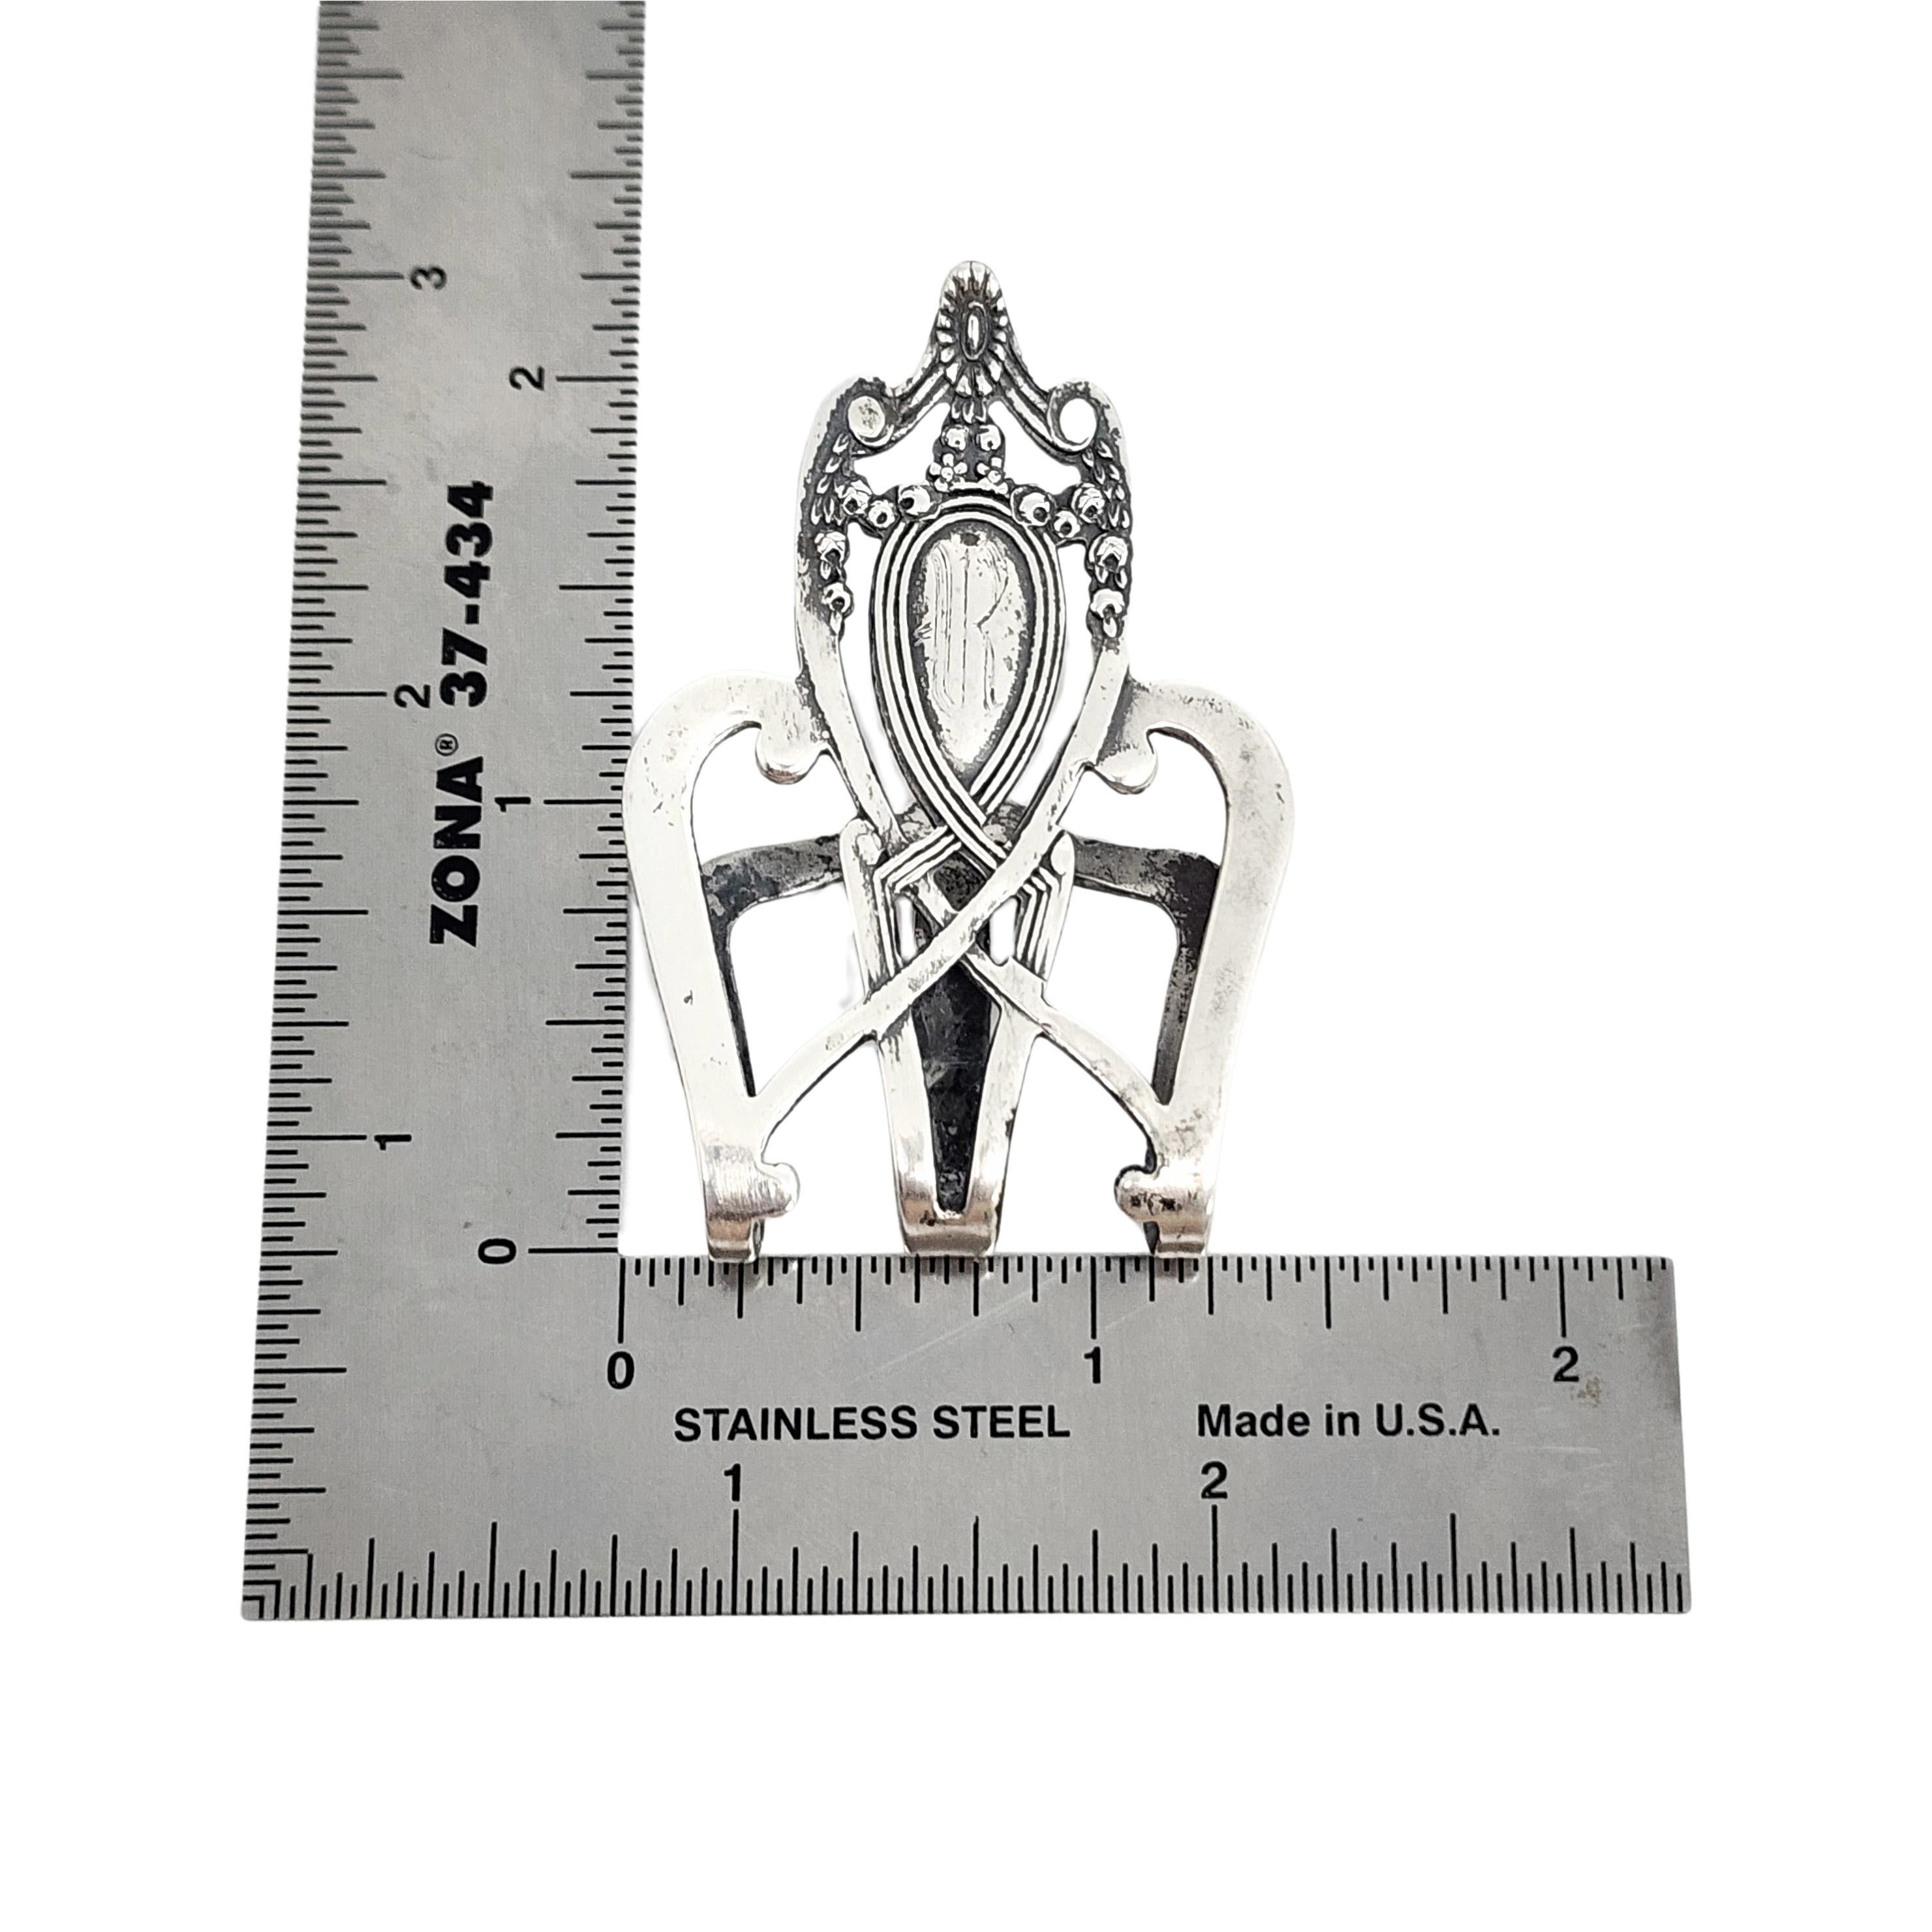 Rogers Lunt & Bowen Monticello 51 Sterling Silver Napkin Clip with Monogram In Good Condition For Sale In Washington Depot, CT